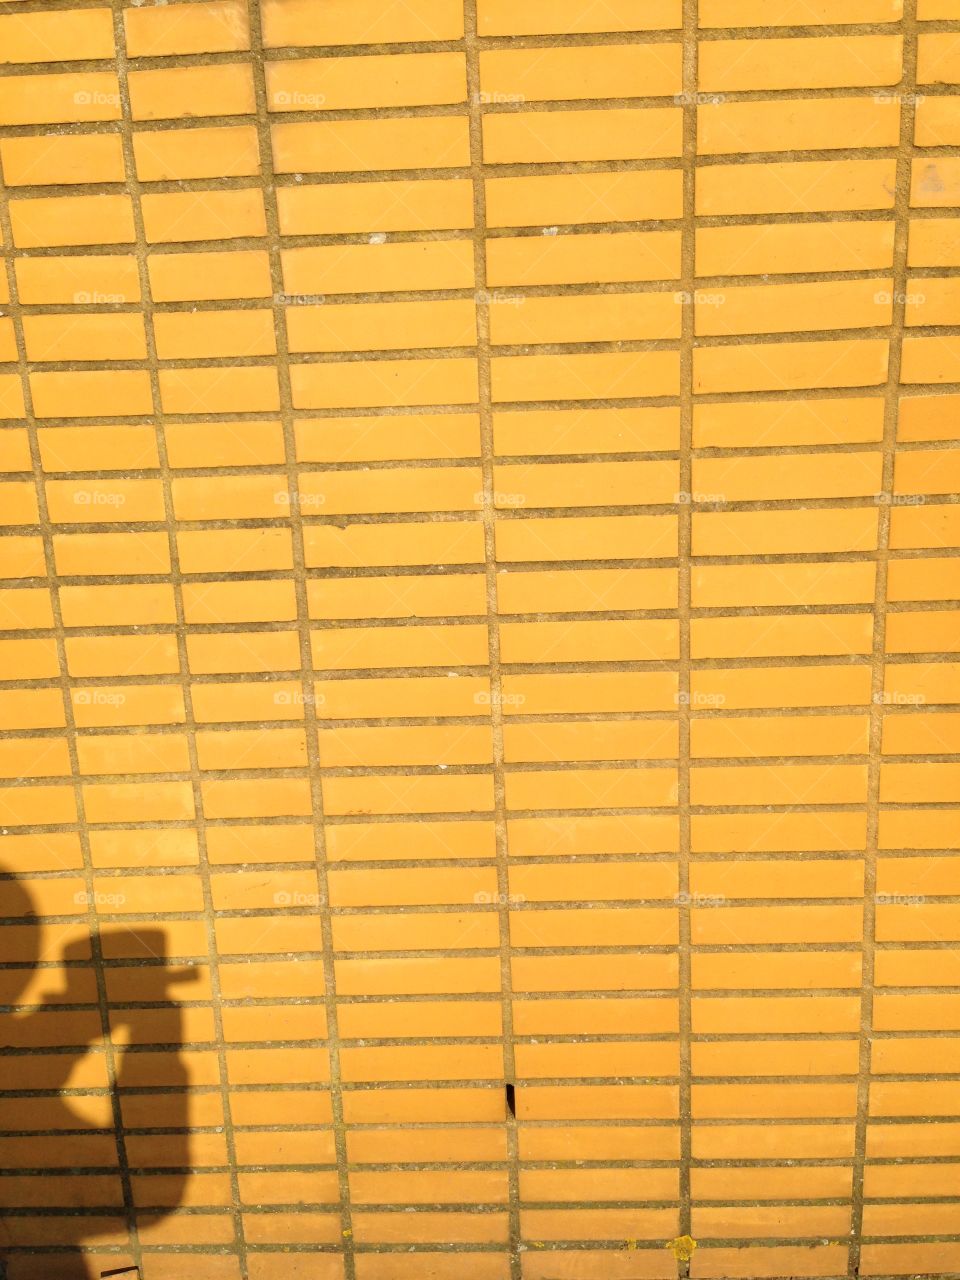 Shadow of me taking a picture of a yellow brick wall.